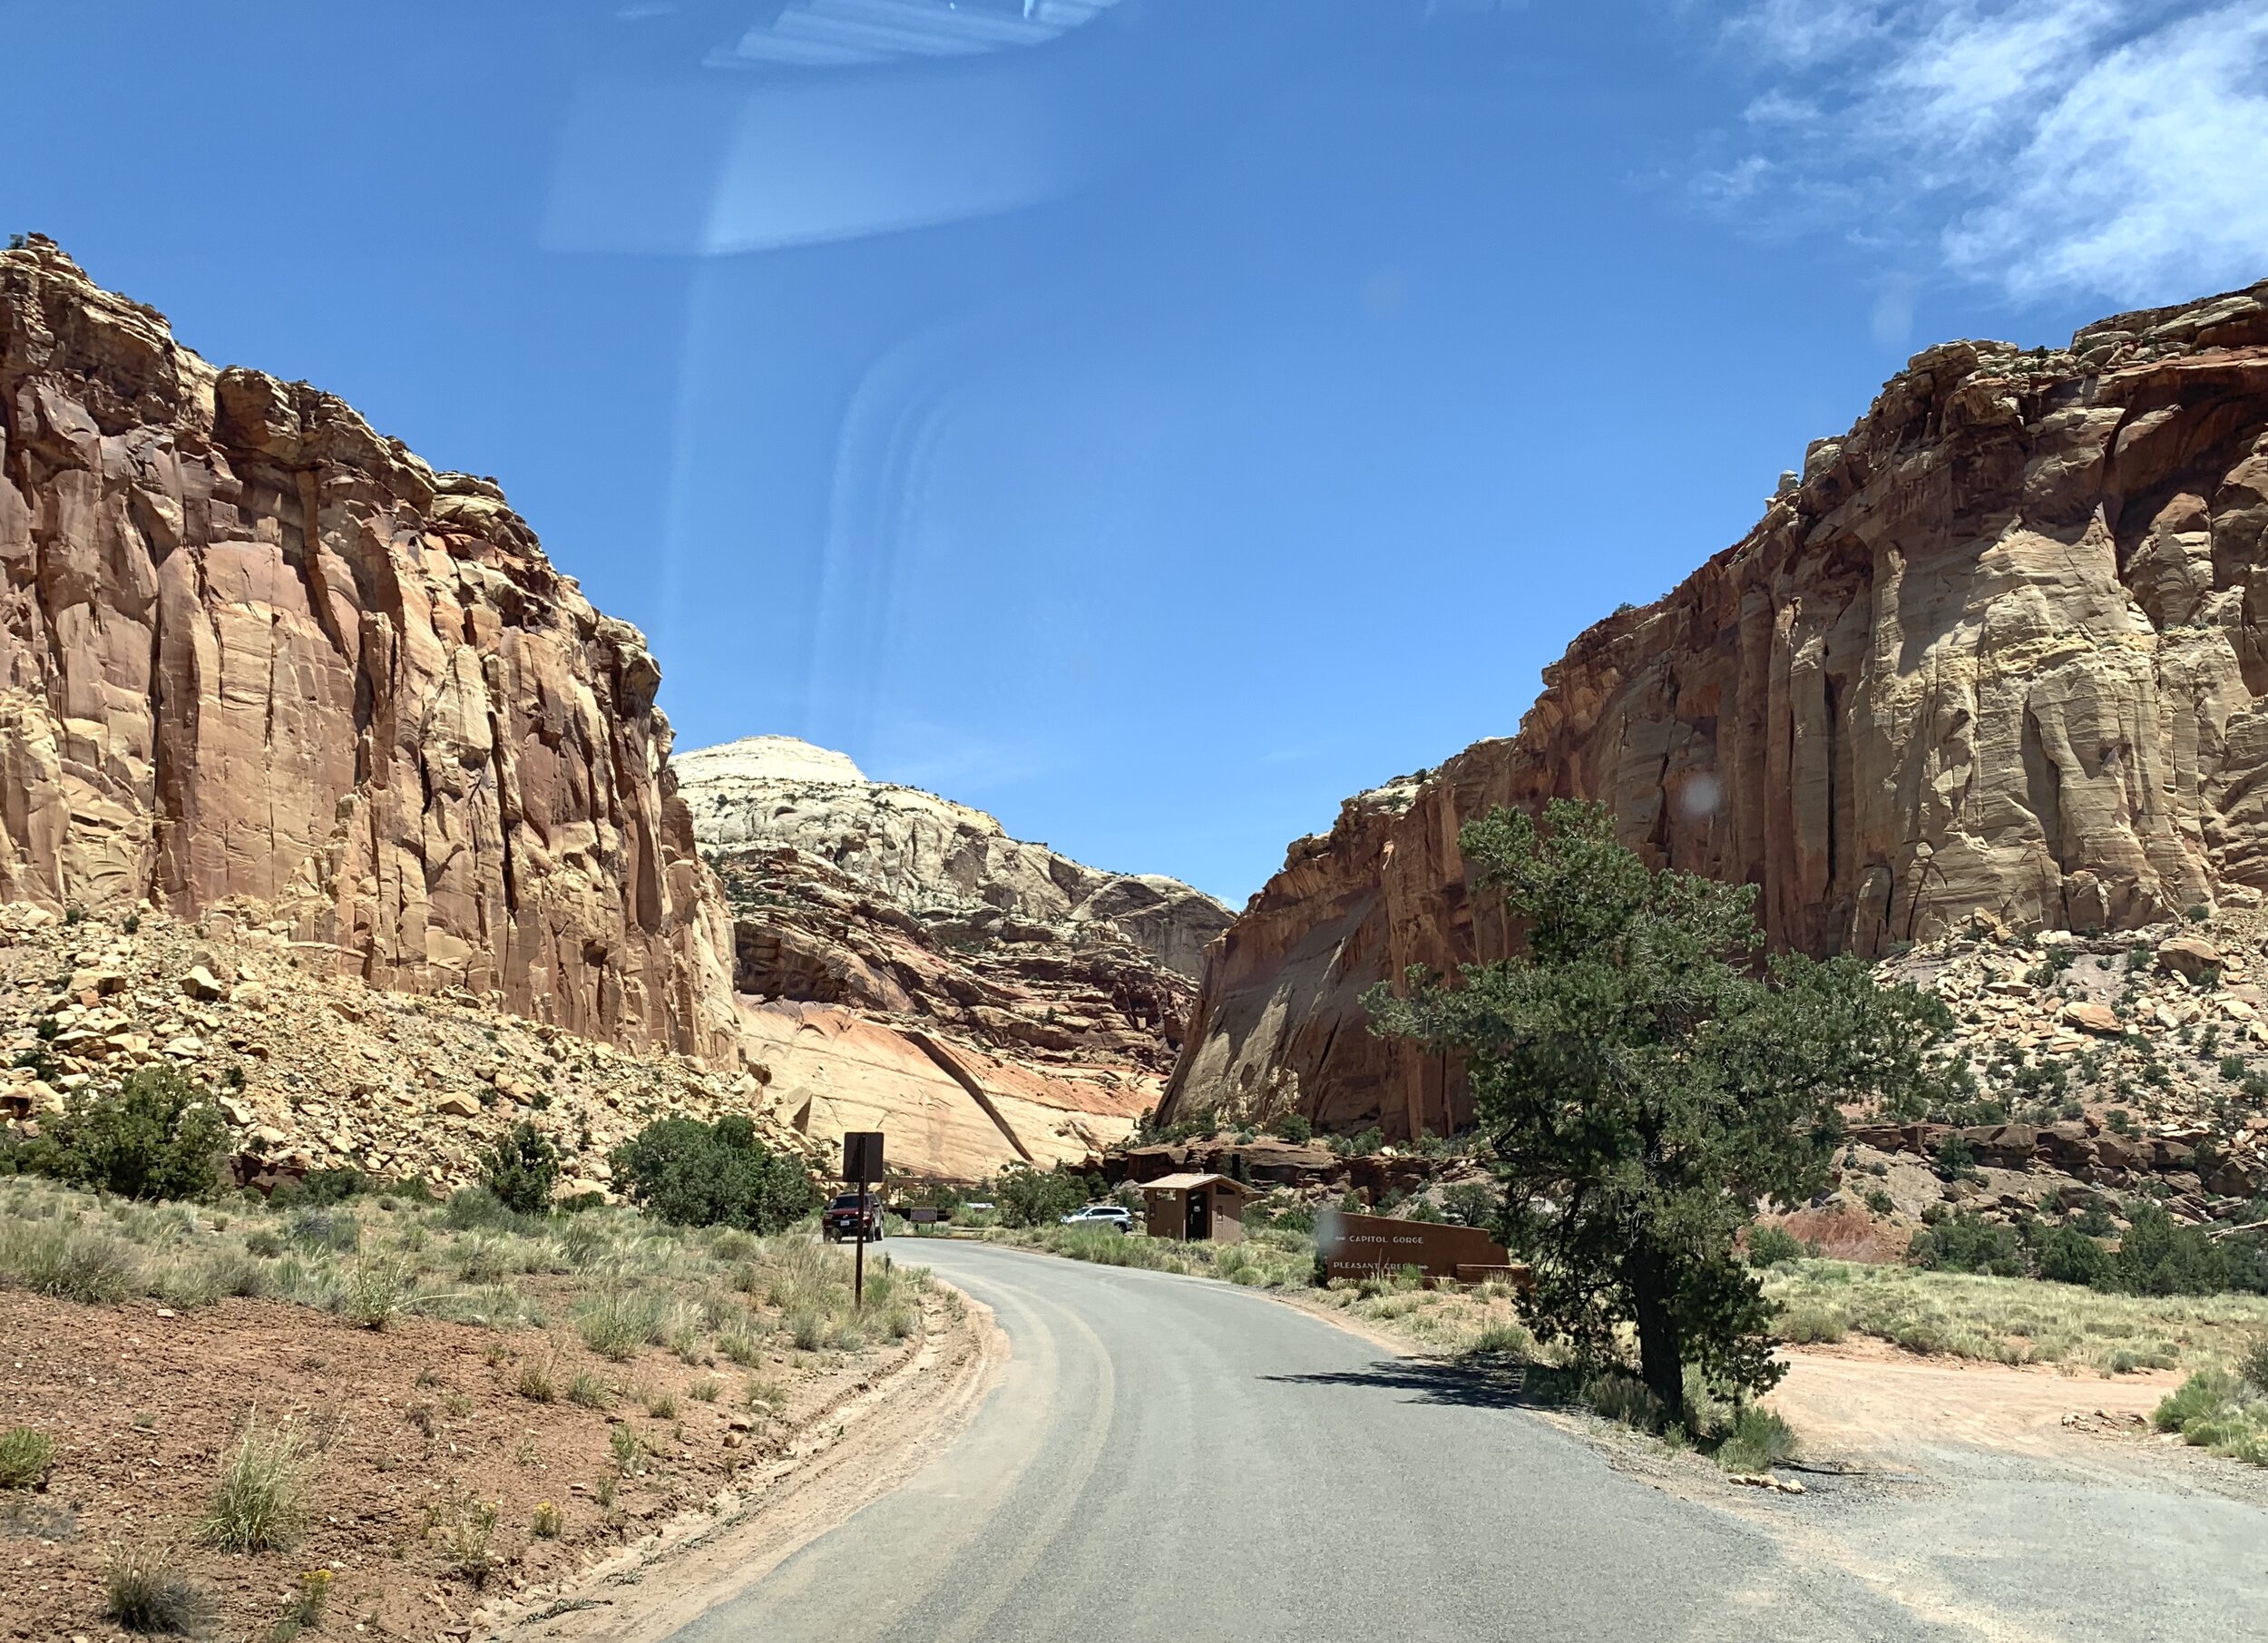  Capitol Reef is named after both the Capitol Building and the Waterpocket Fold. “Capitol” refers to white features that resemble the capitol building in Washington, while “reef” refers to the rocky Waterpocket Fold. 